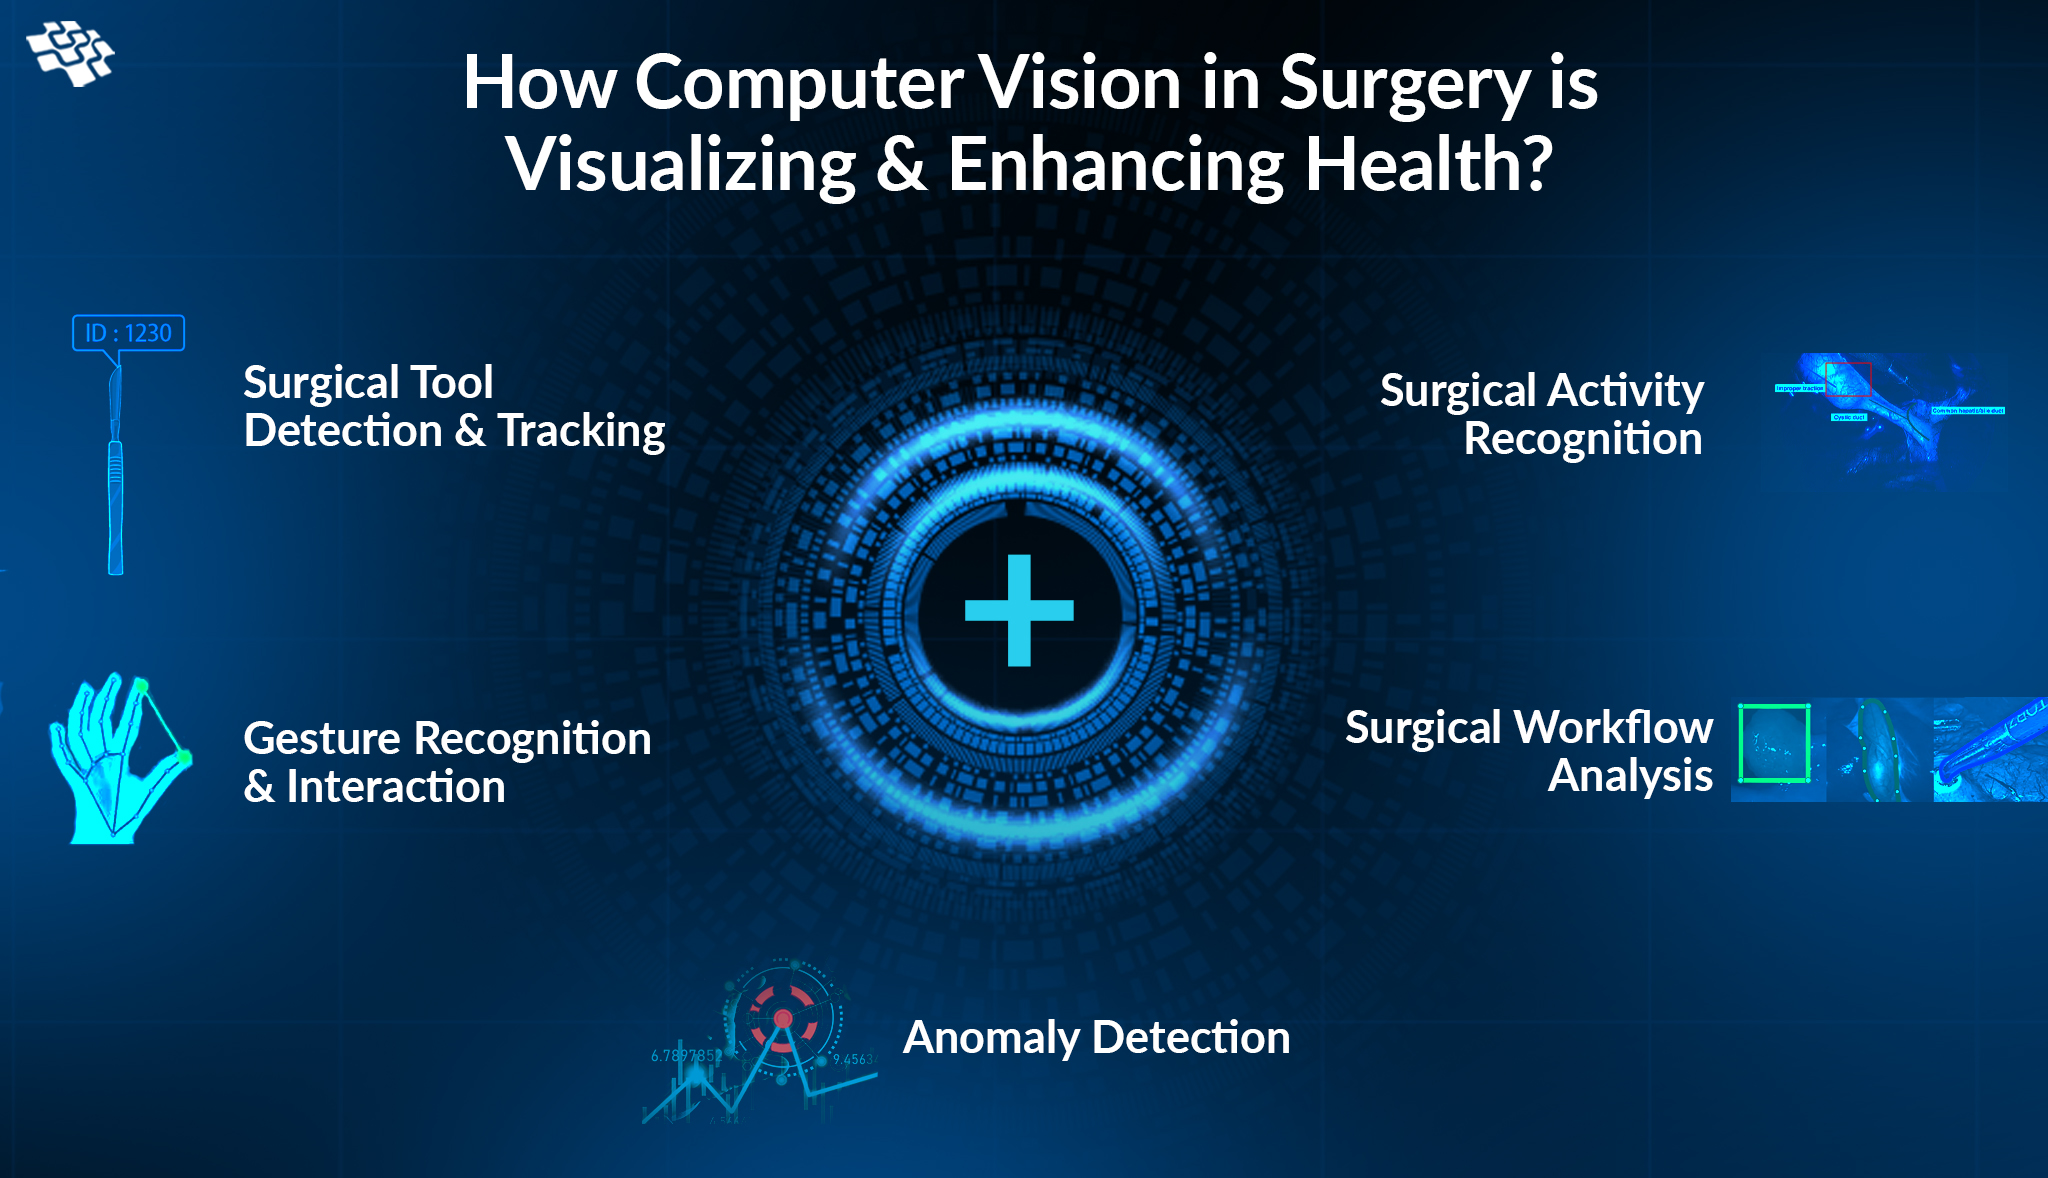 Computer vision in surgery visualizing health